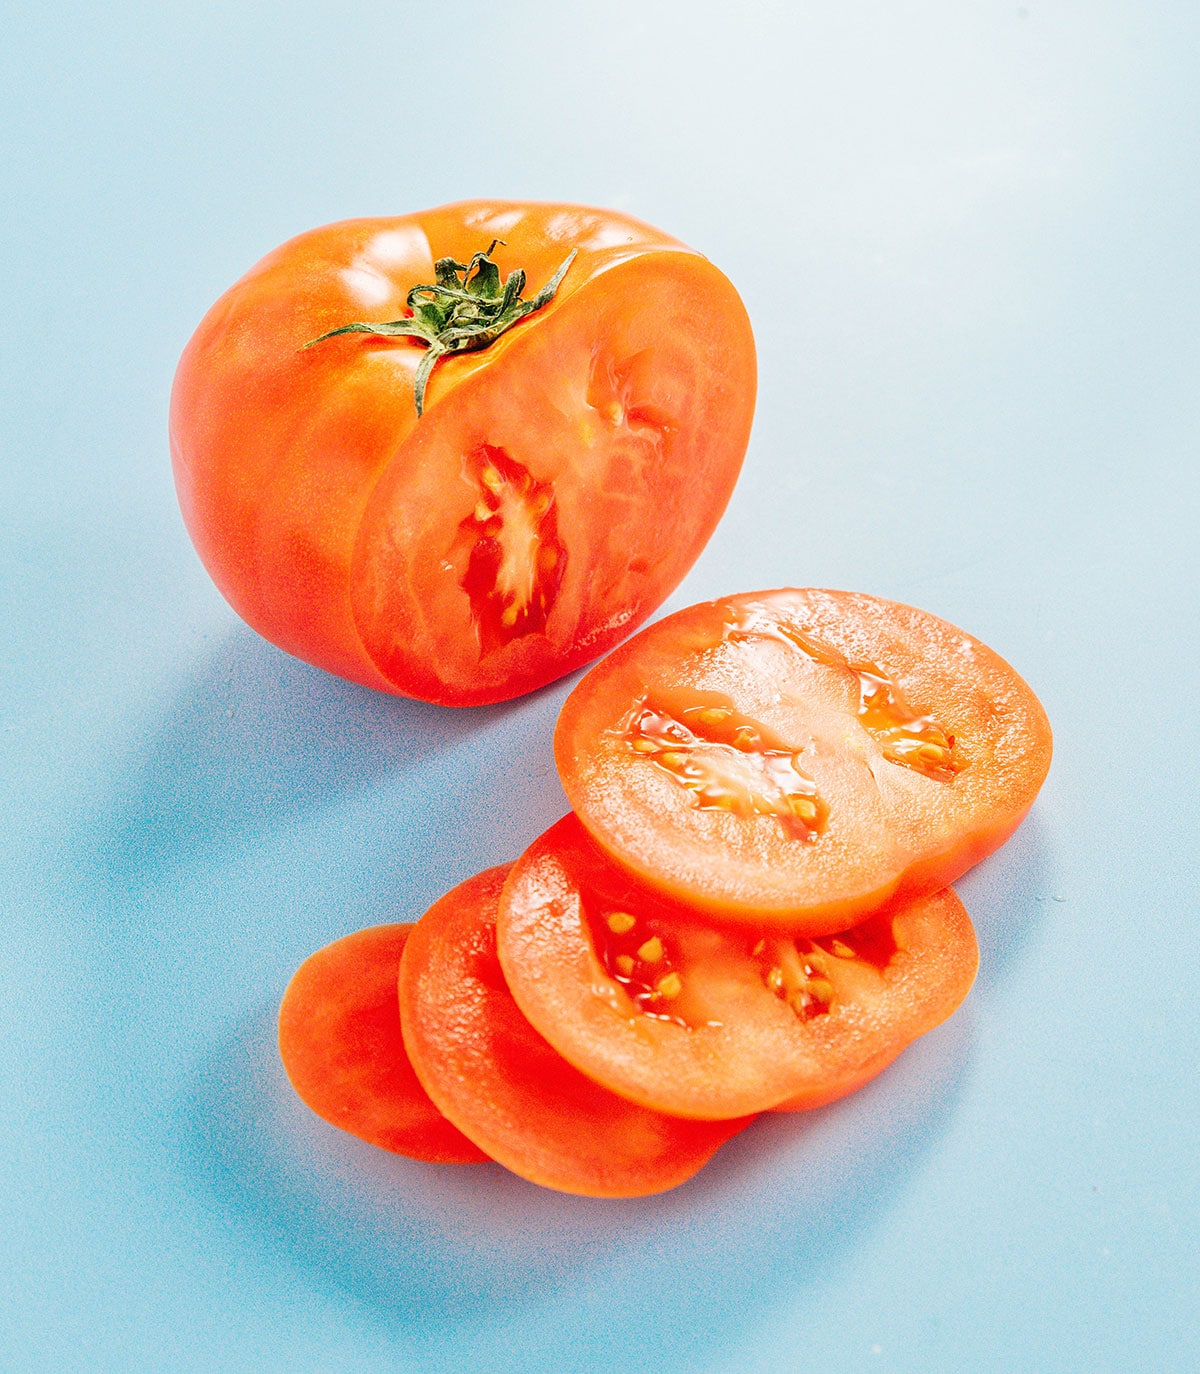 A tomato with half of it cut in slices on a blue surface.